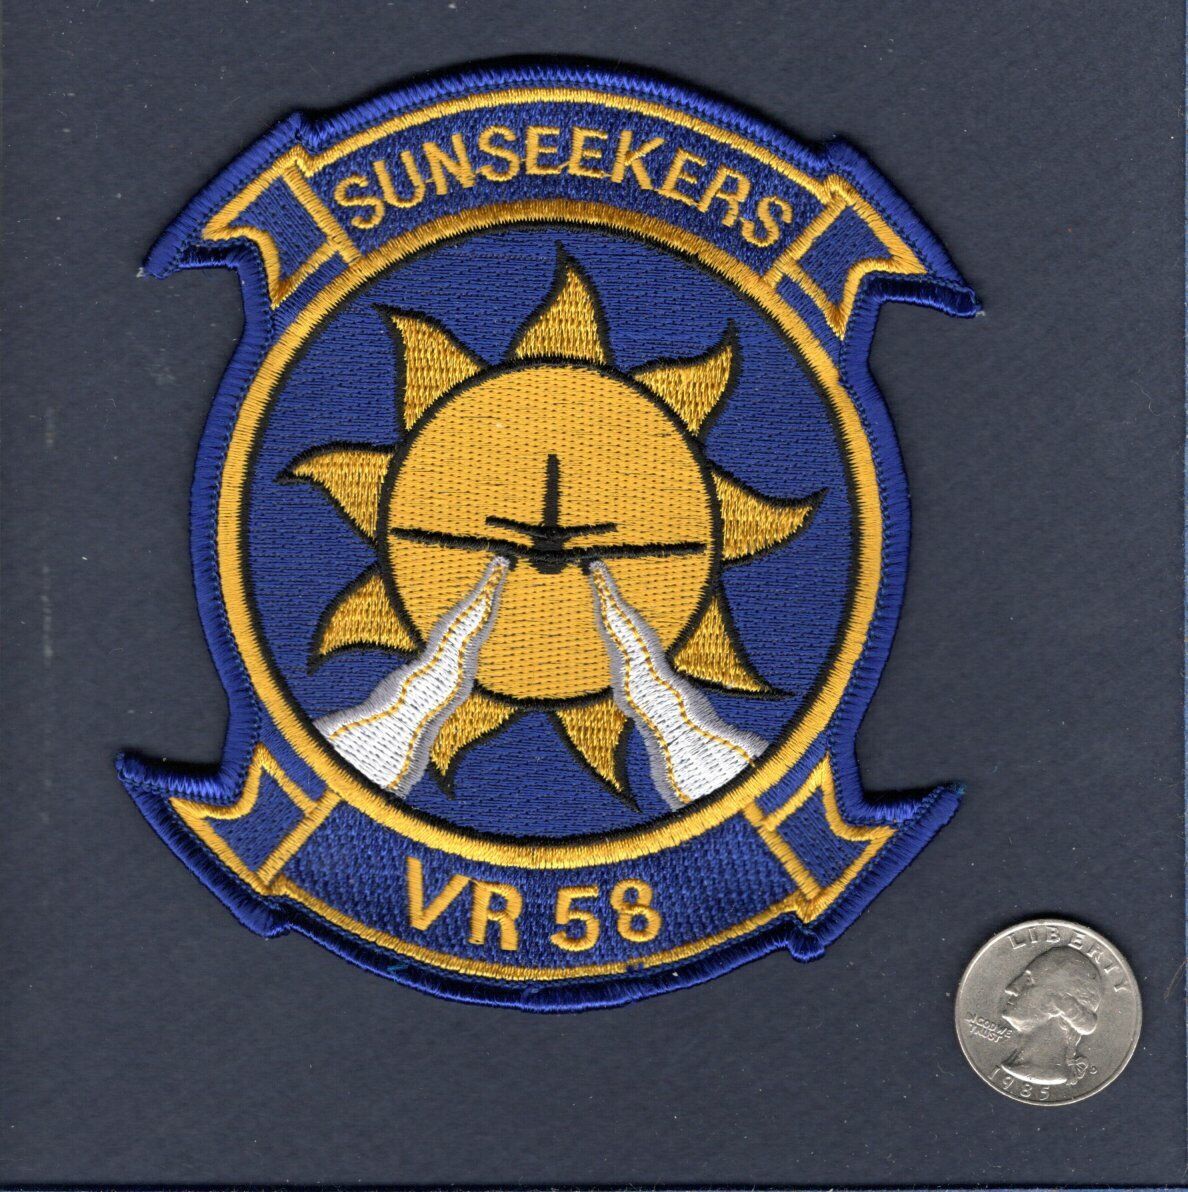 Original VR-58 SUNSEEKERS US NAVY Reserve C-40 CLIPPER Logistic Squadron Patch